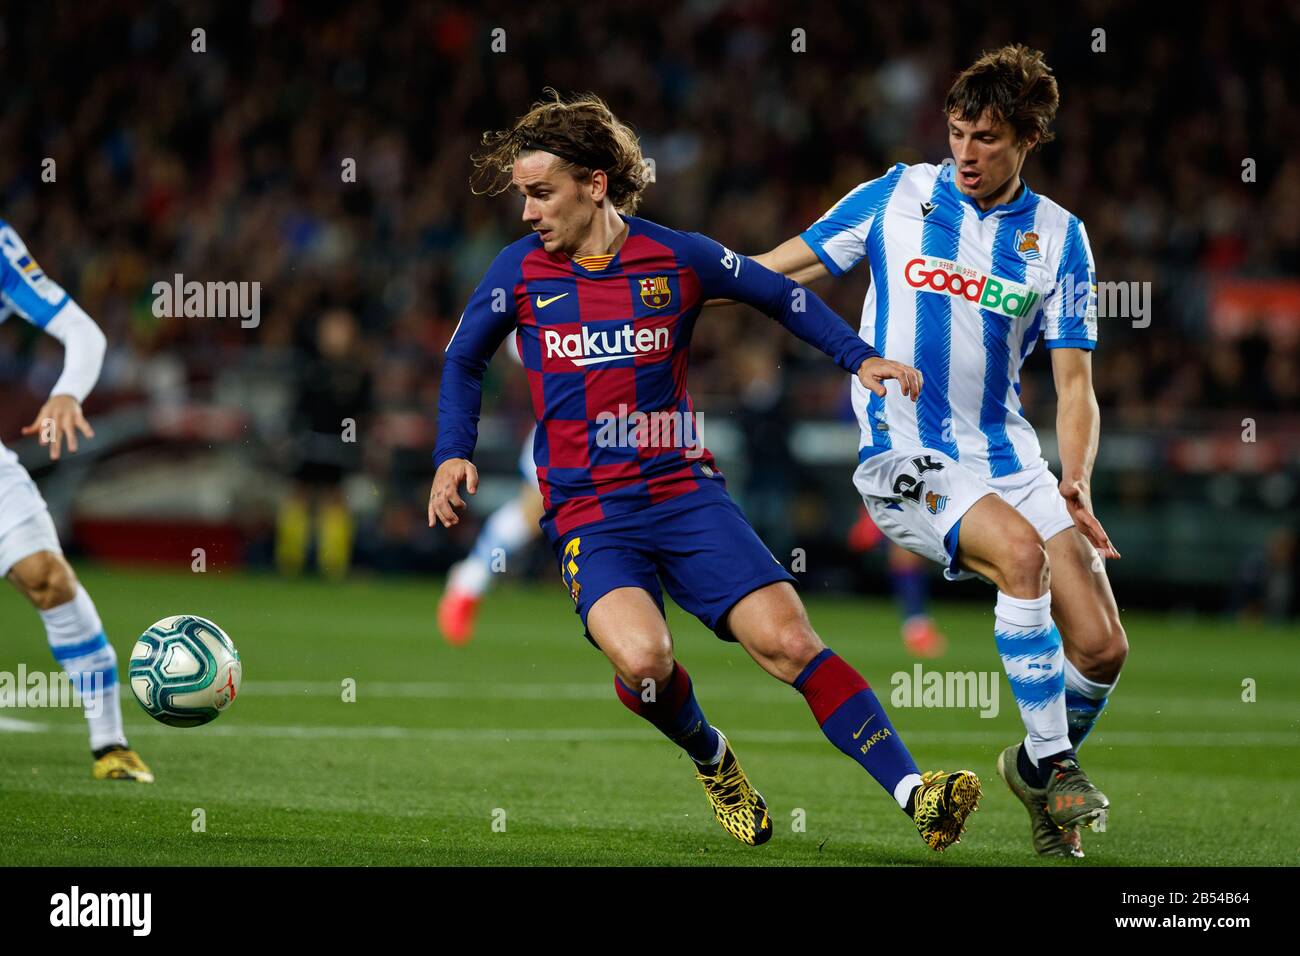 BARCELONA, SPAIN - MARCH 07: Antoine Griezmann of FC Barcelona in action with Junior Firpo of FC Barcelona during the Liga match between FC Barcelona and Real Sociedad at Camp Nou on March 07, 2020 in Barcelona, Spain. Stock Photo